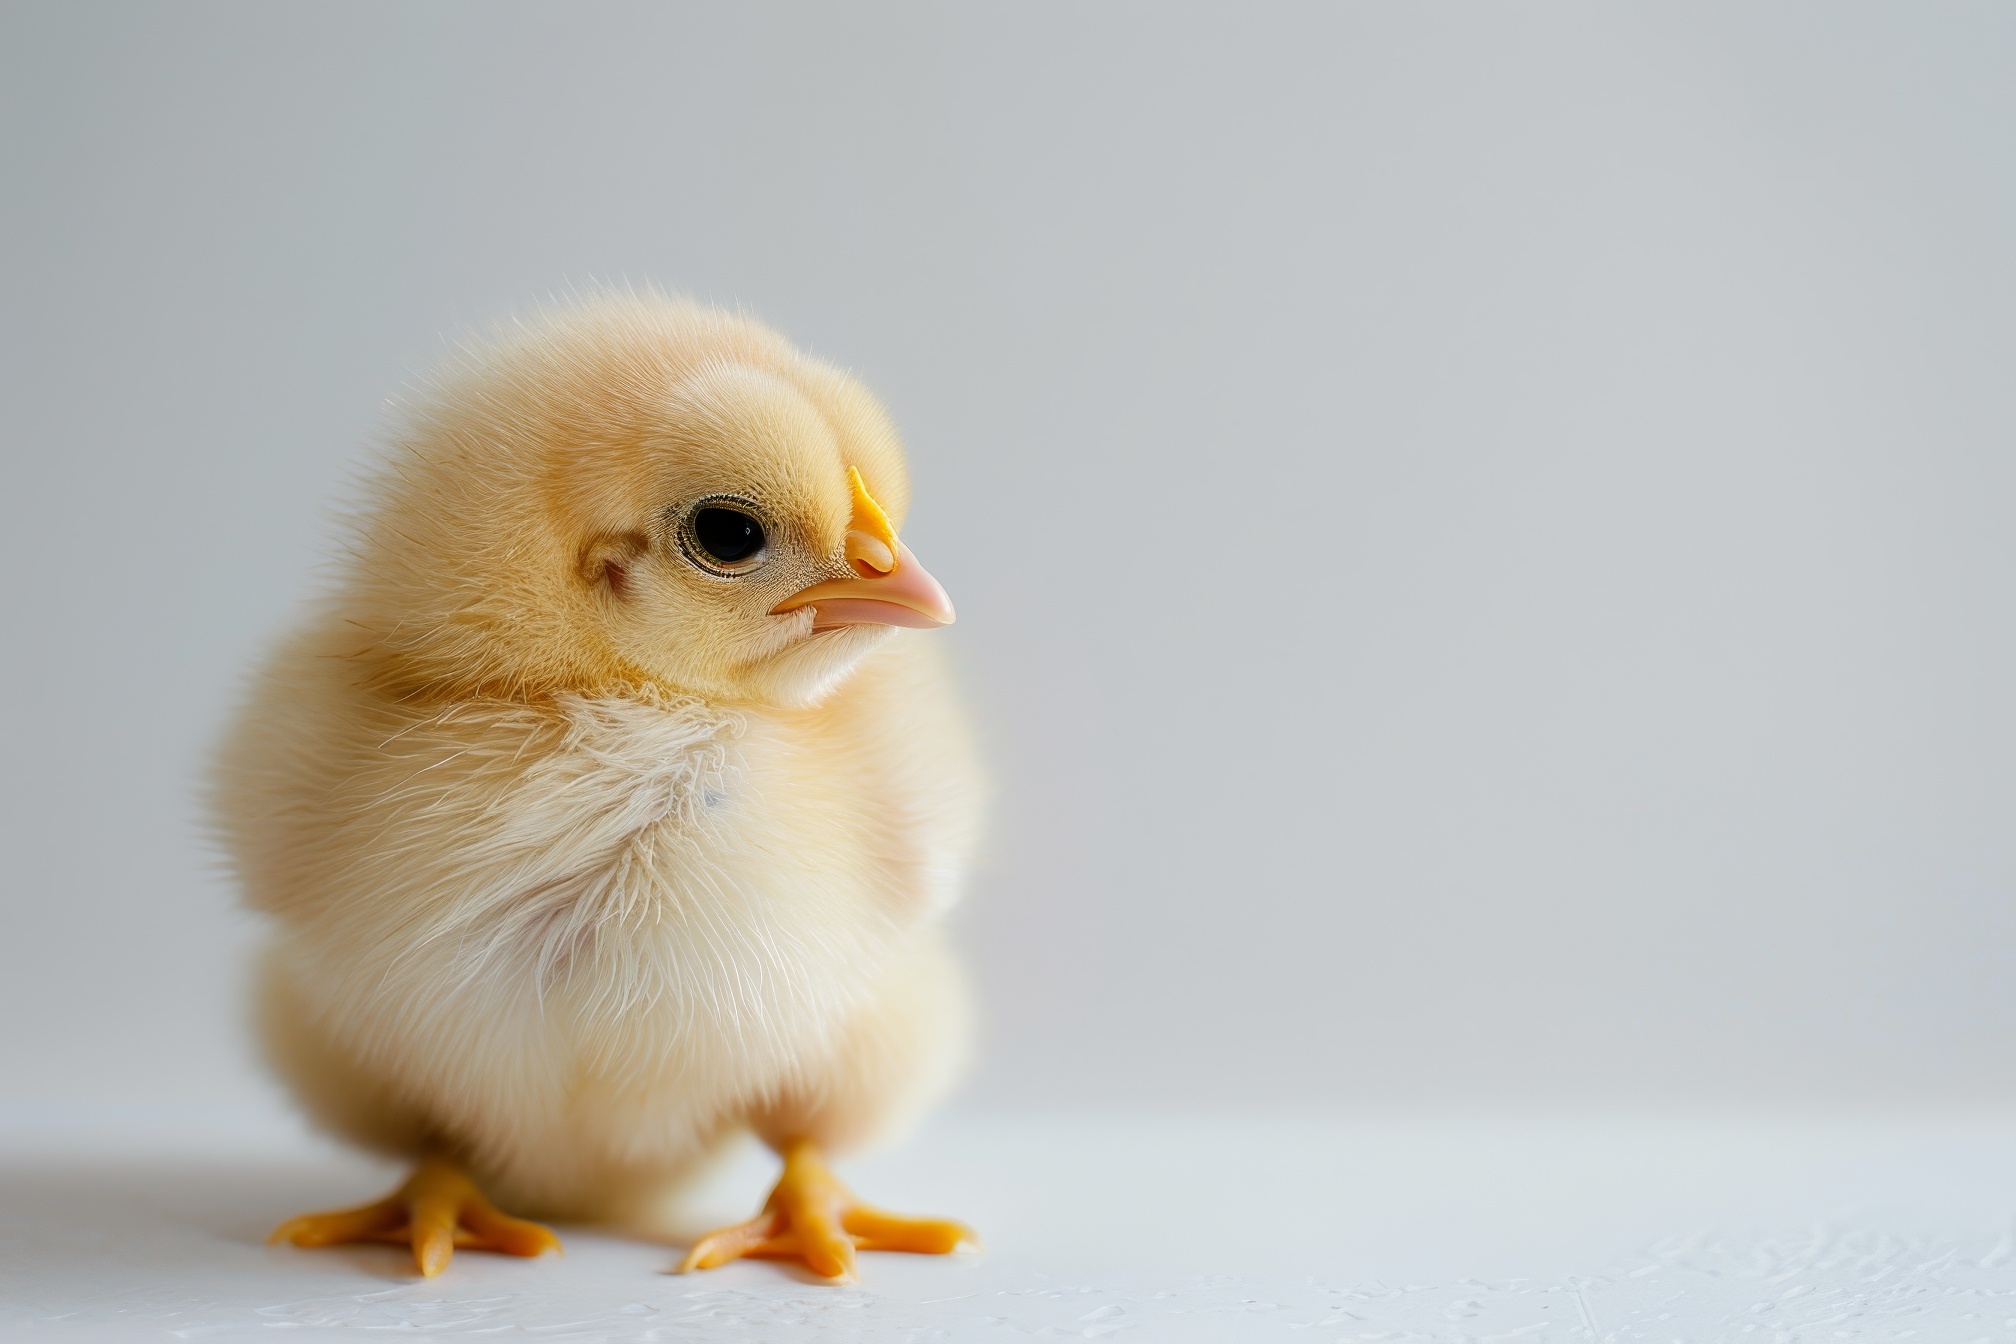 Cute yellow chicken isolated on a solid background